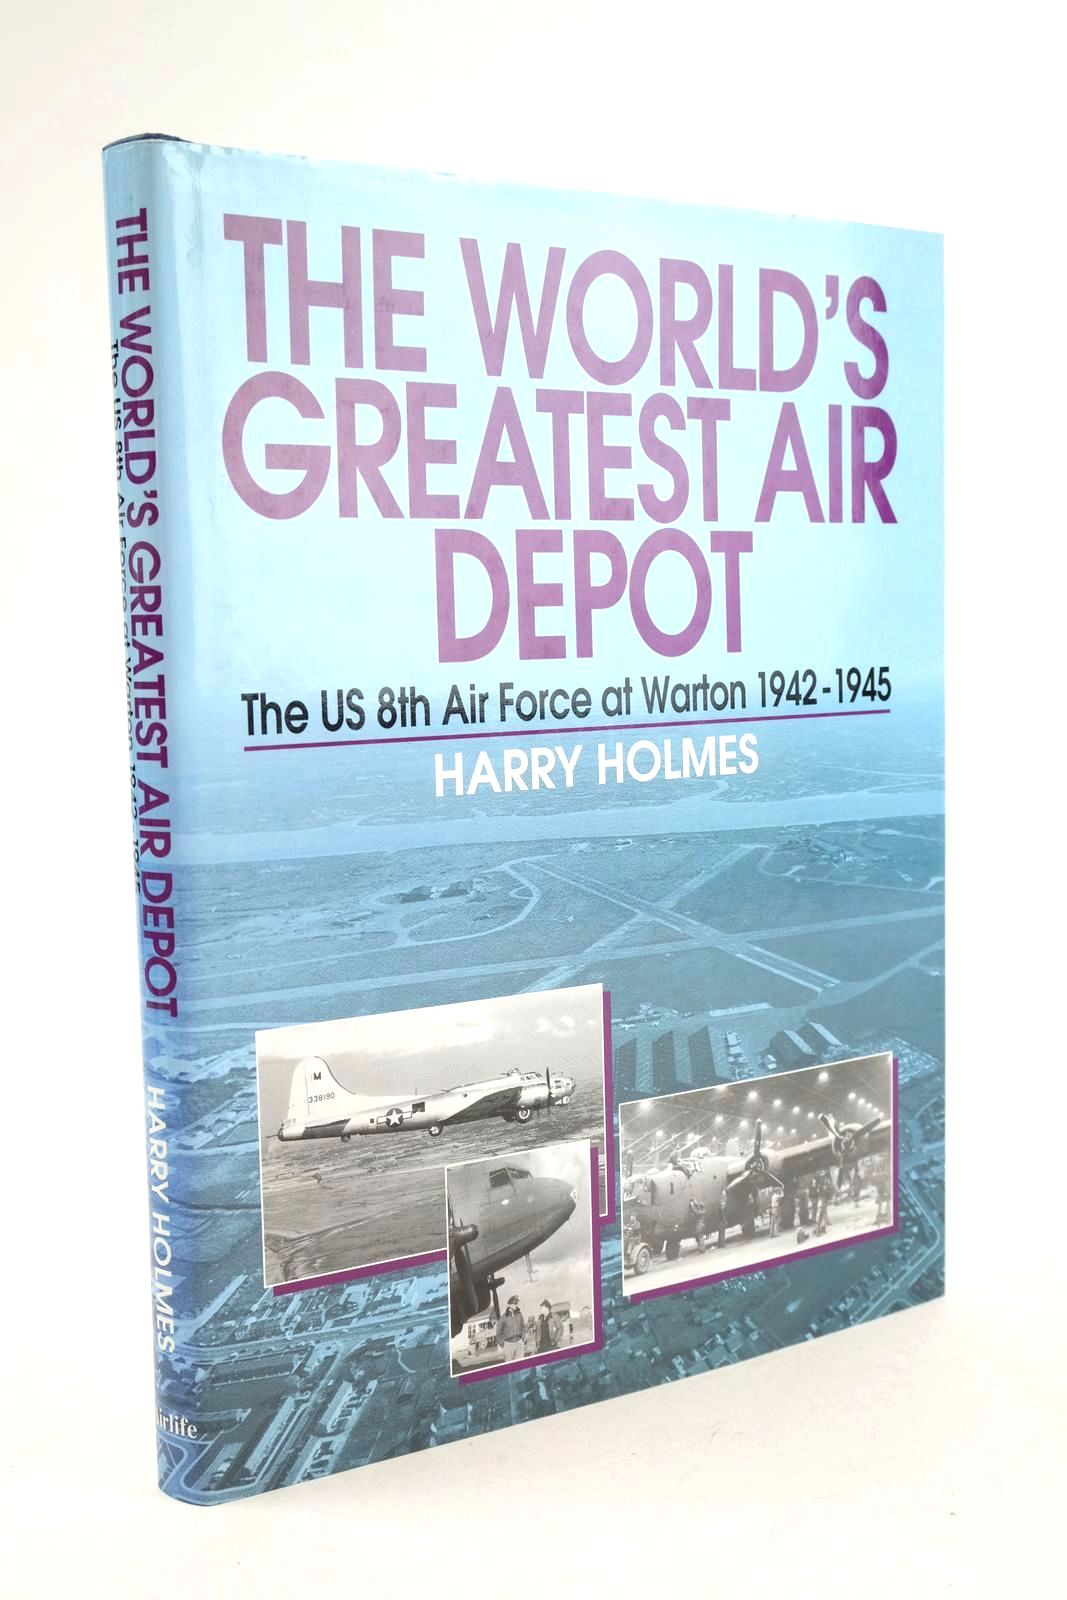 Photo of THE WORLD'S GREATEST AIR DEPOT written by Holmes, Harry published by Airlife (STOCK CODE: 1325307)  for sale by Stella & Rose's Books